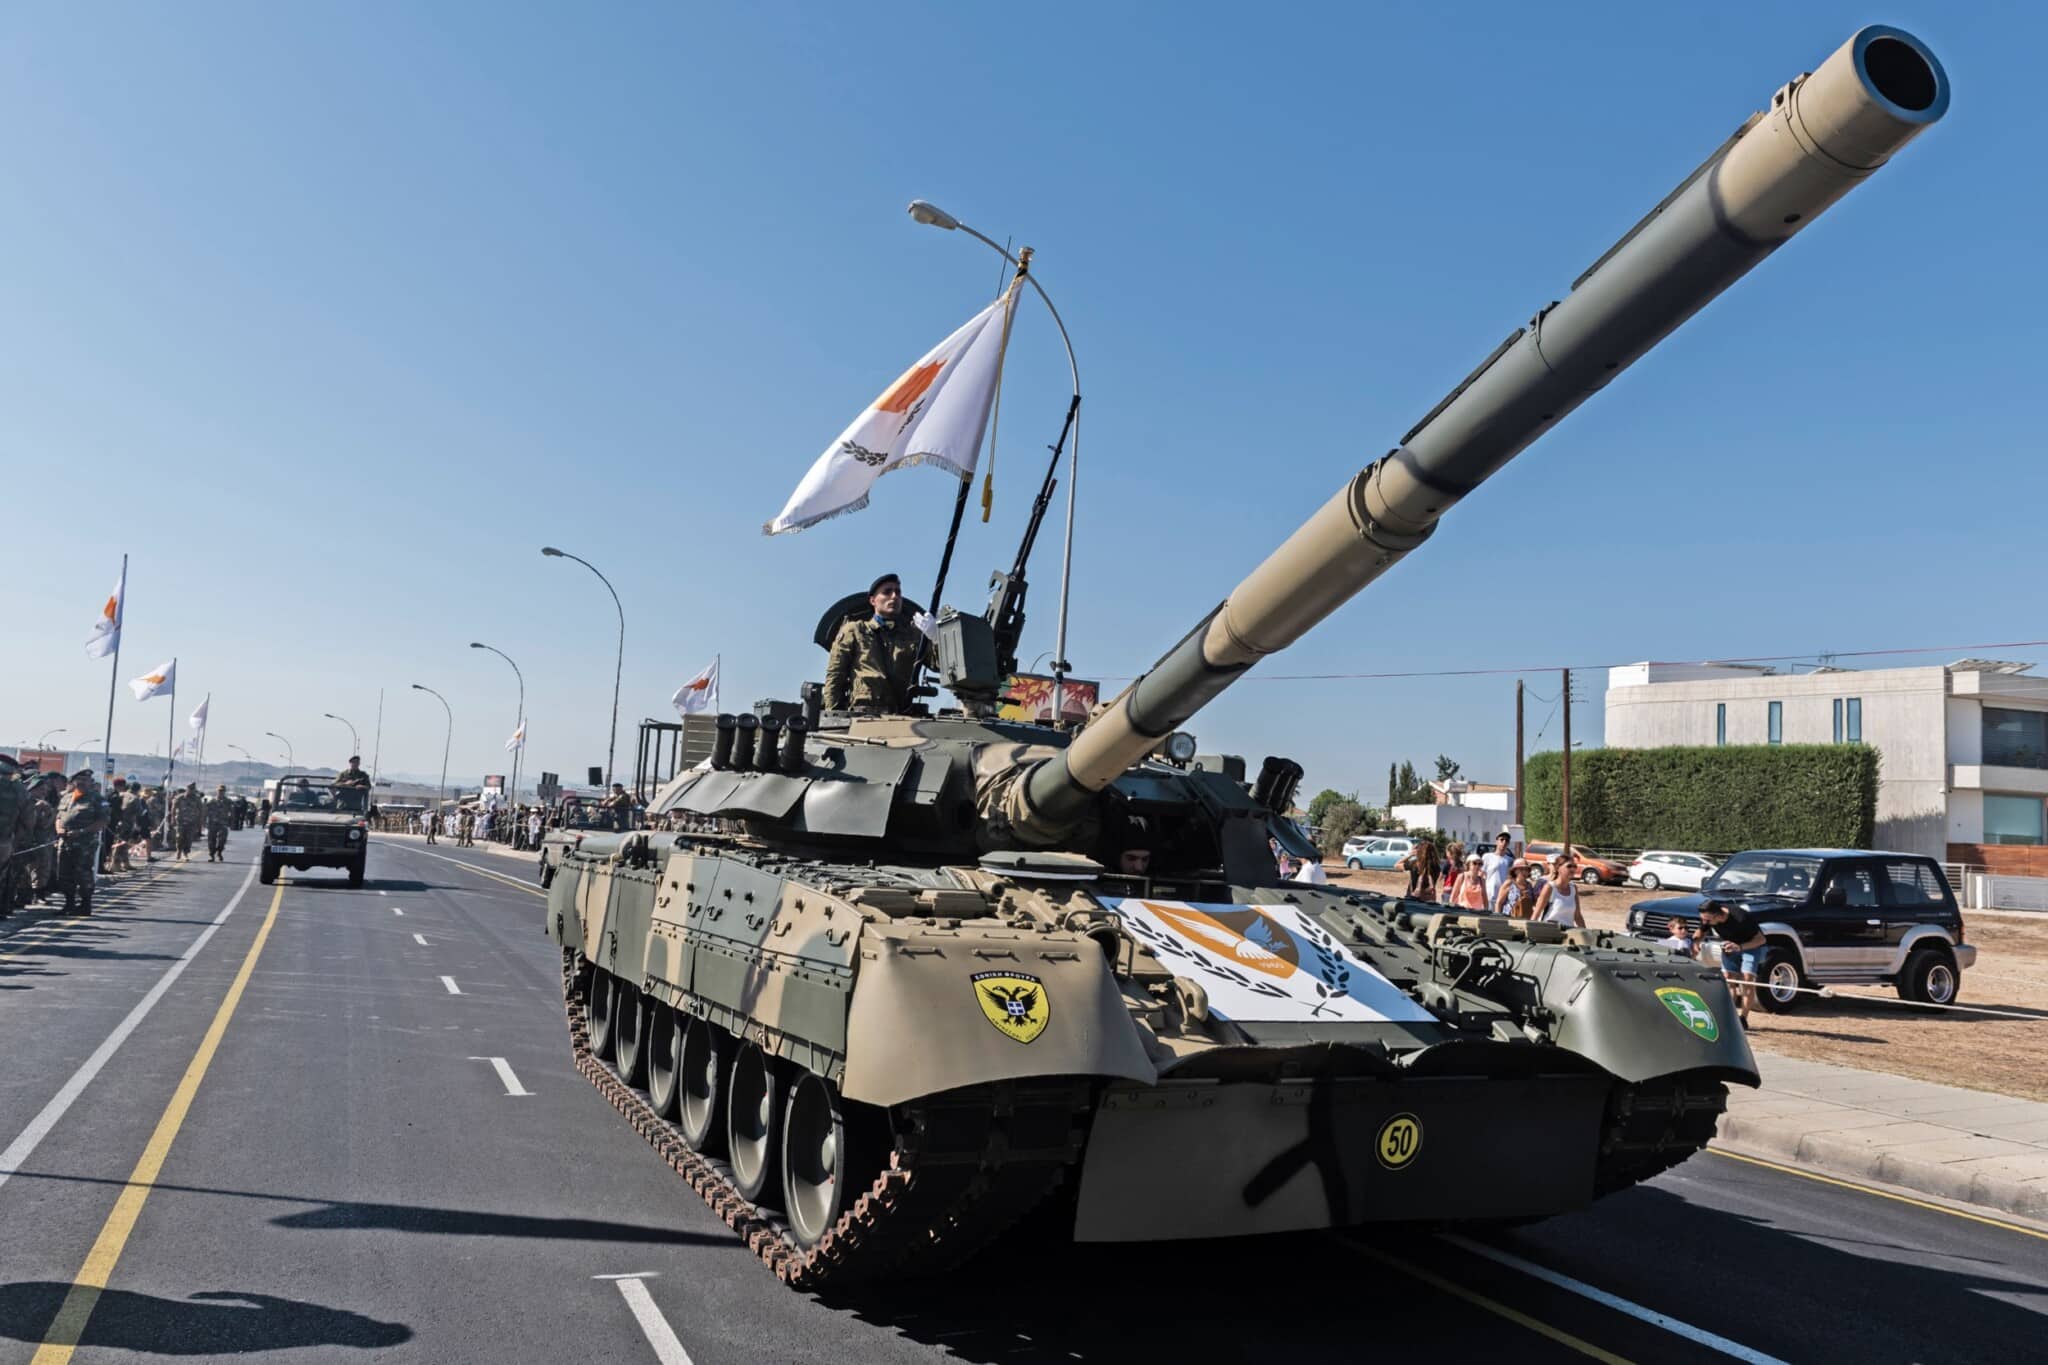 How to get Kyiv the Tanks and Armored Vehicles It Needs